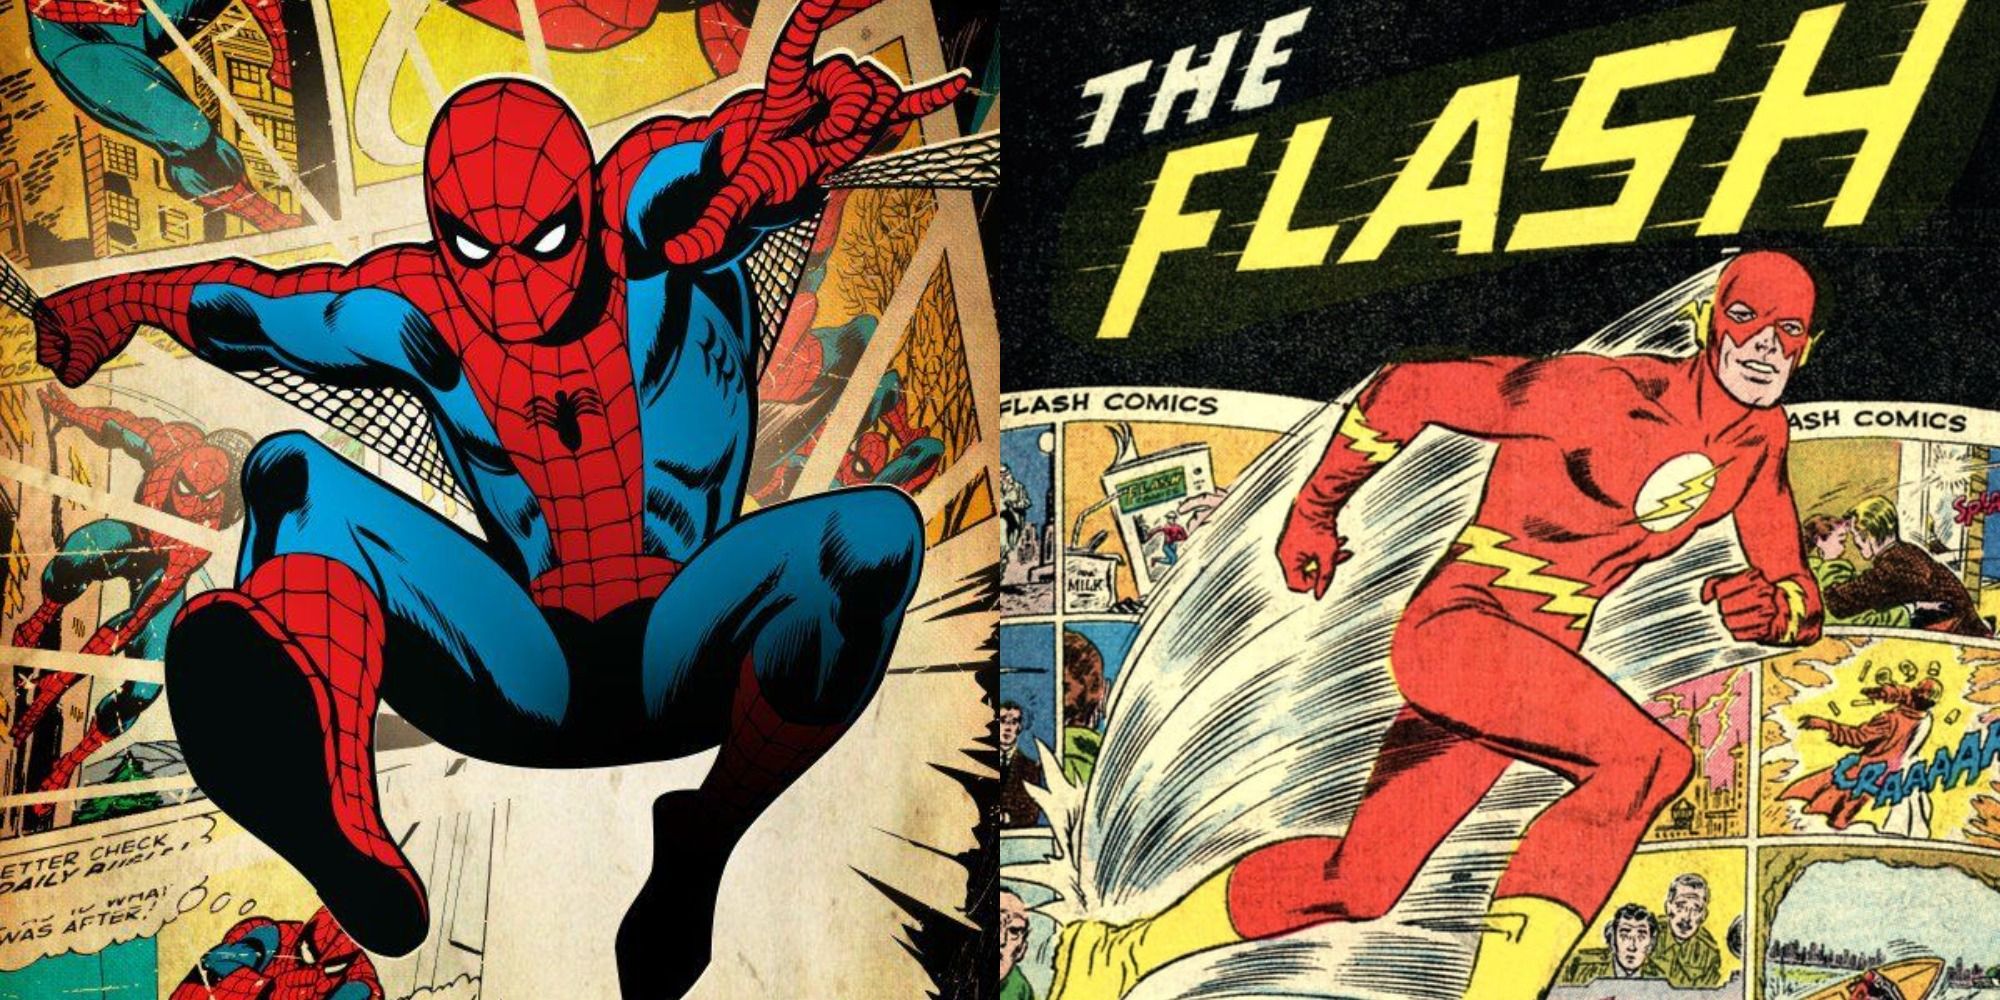 Split image showing Spider-Man and Flash in Silver Age comics